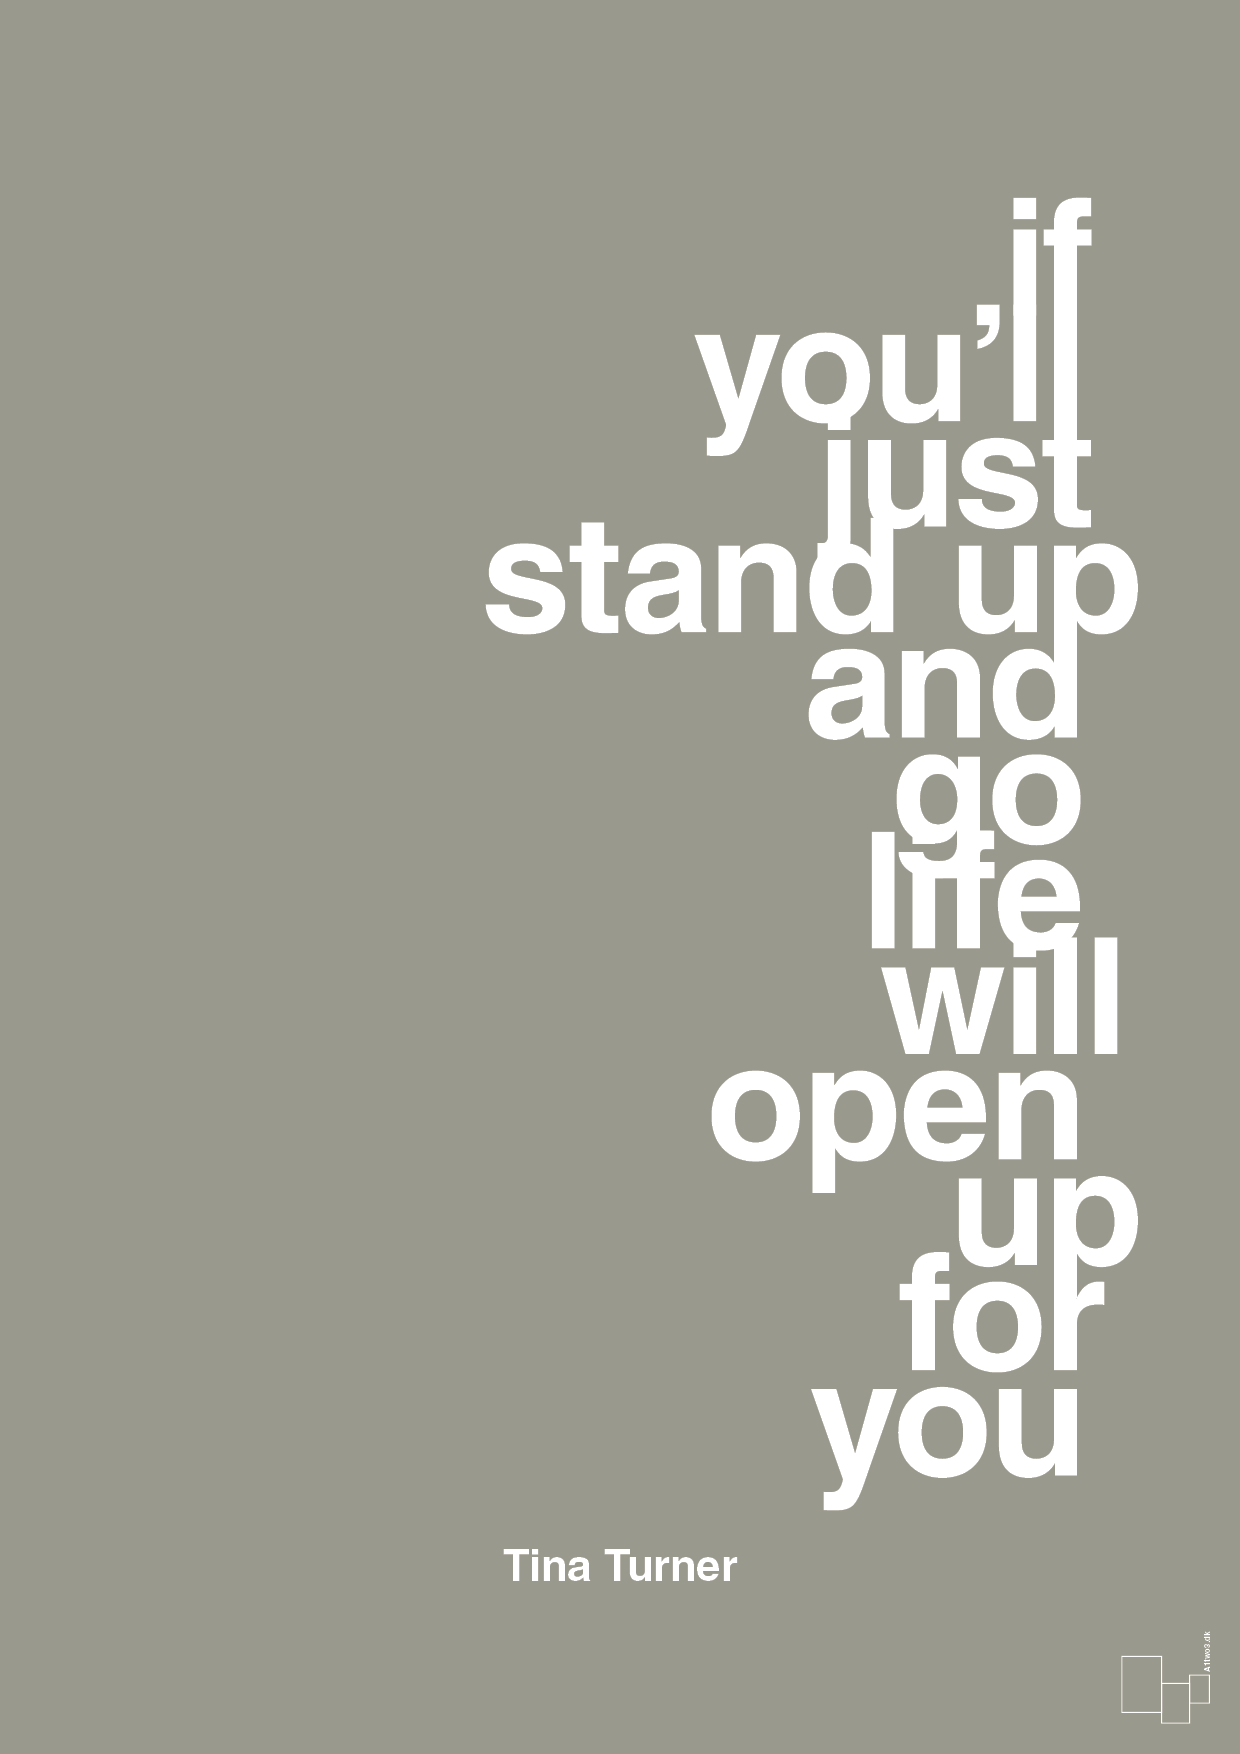 if you’ll just stand up and go life will open up for you - Plakat med Citater i Battleship Gray